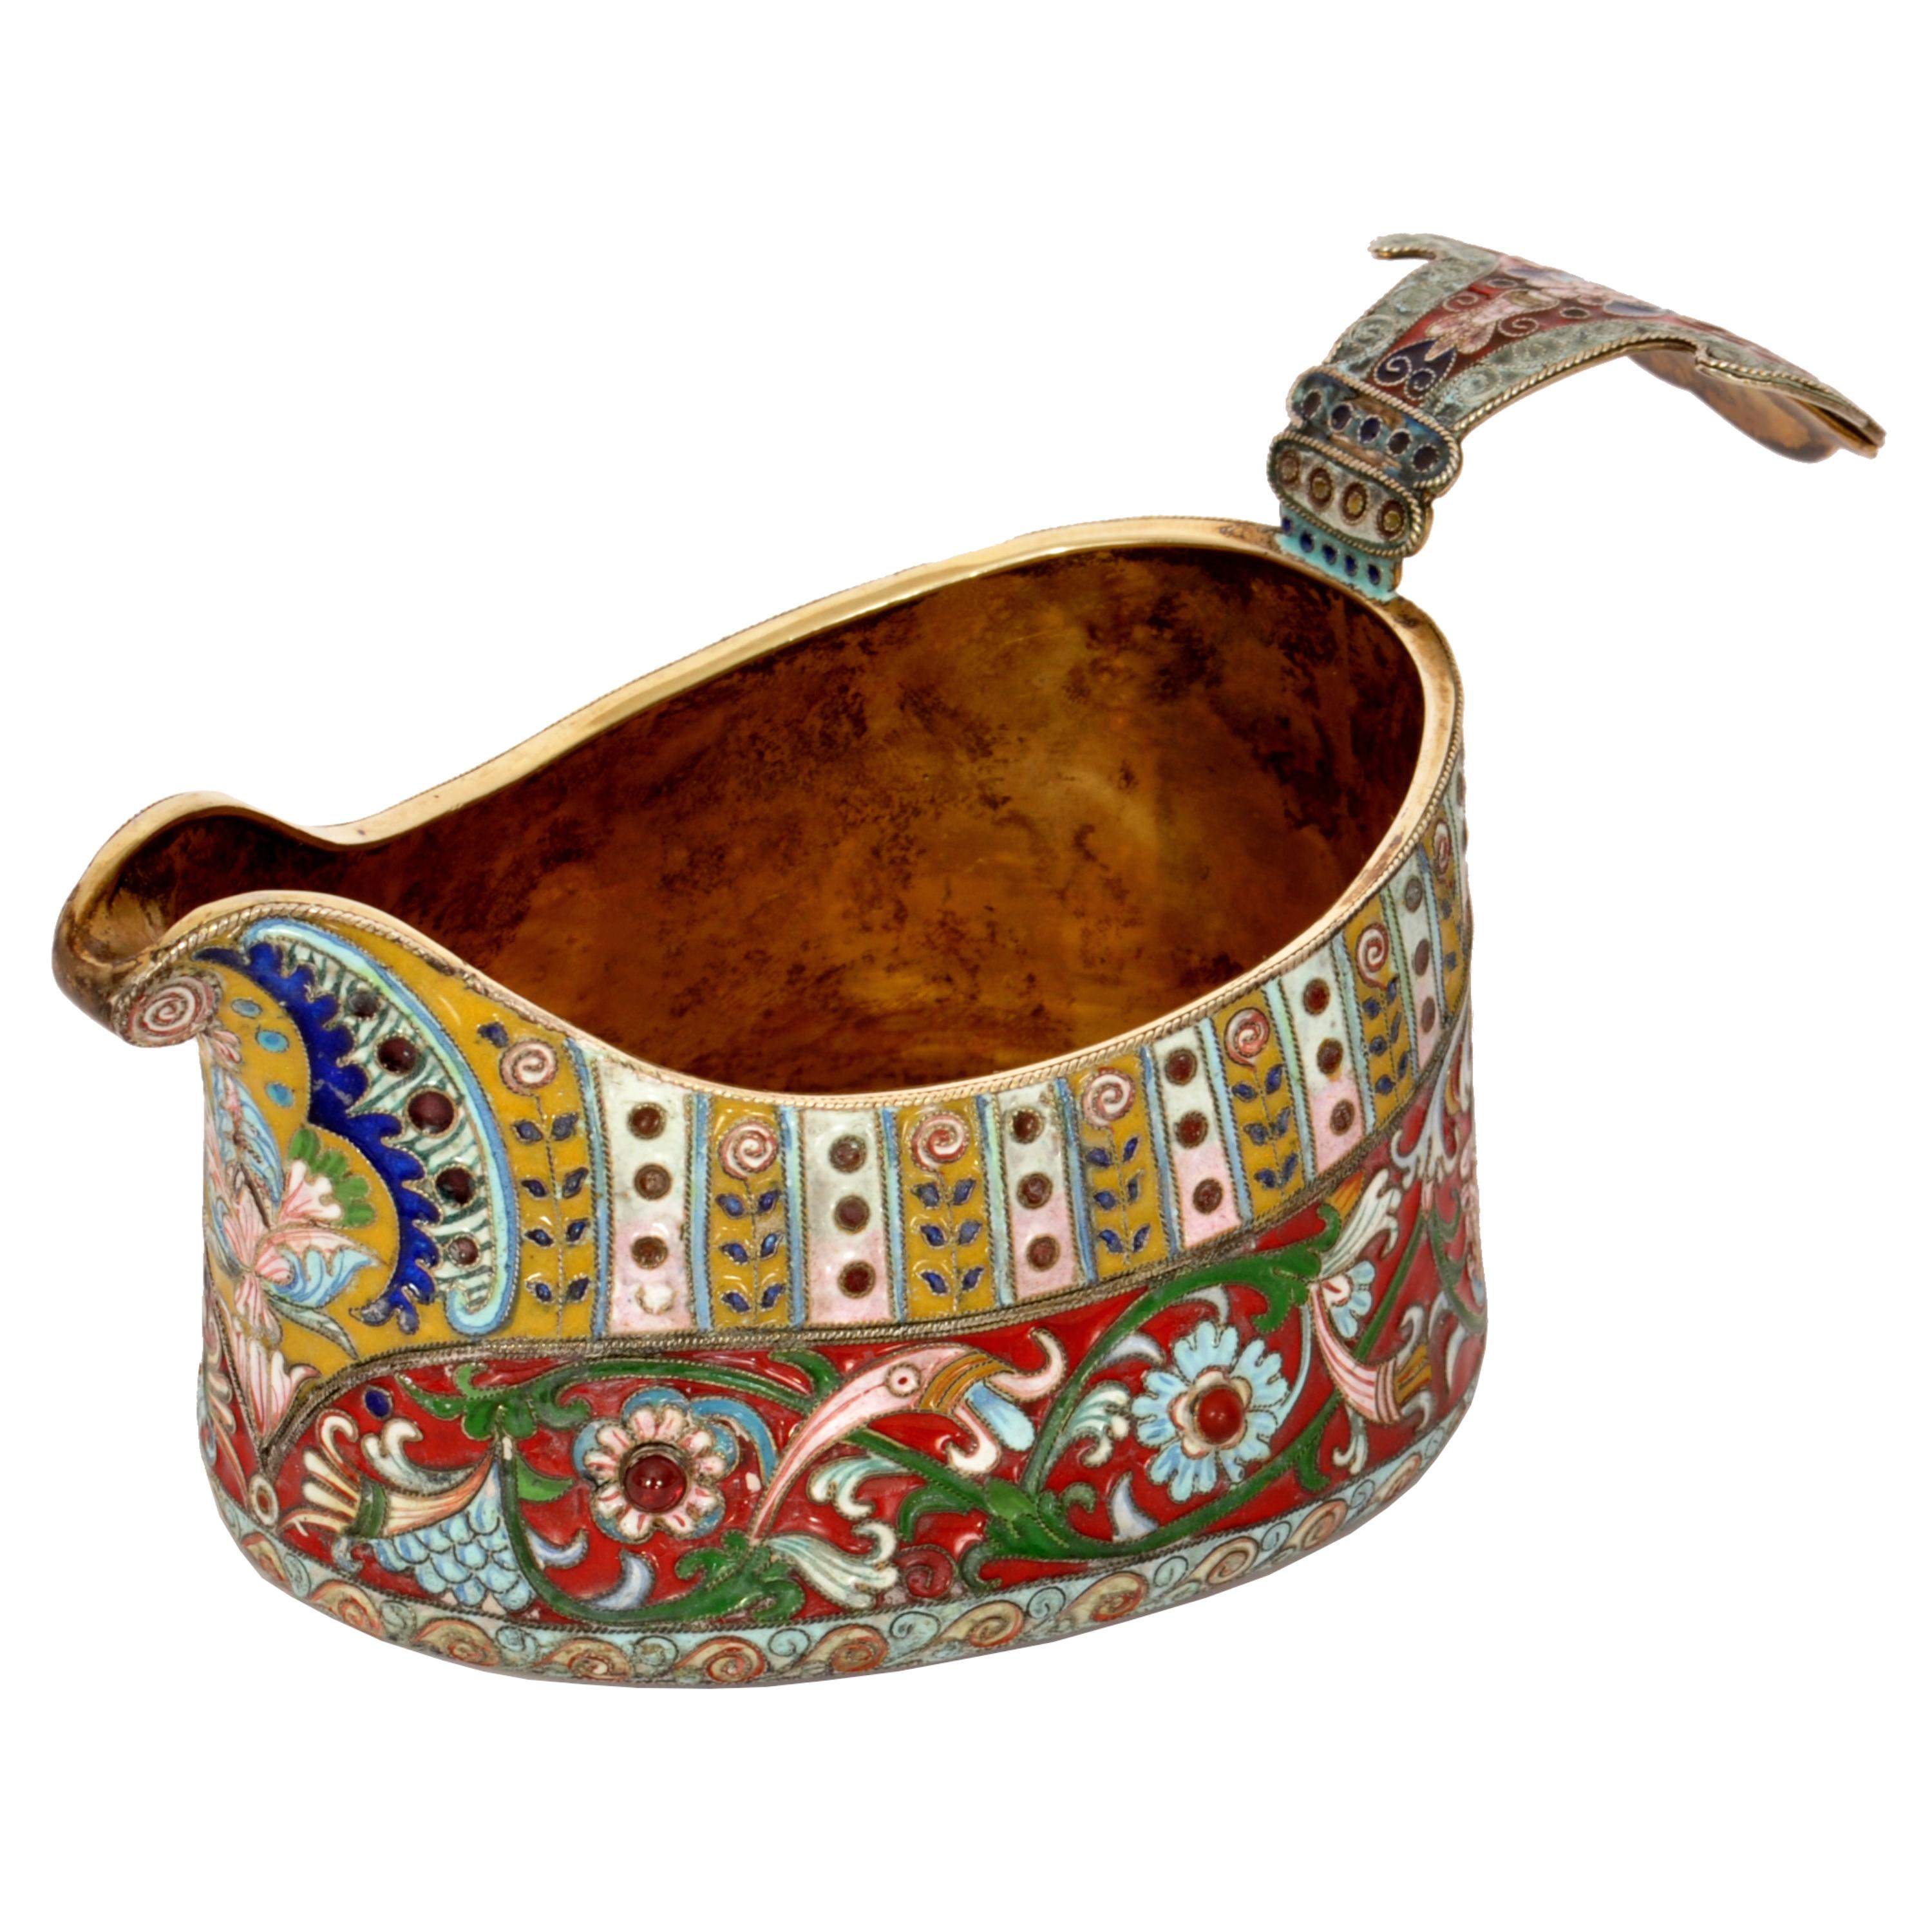 Antique Russian silver-gilt jeweled cloisonne enameled Faberge kovsh, circa 1908.
The Kovsh is finely decorated with an all over floral enamel design and towards the base it is punctuated with cabochons (possibly rubies, but the stones have not